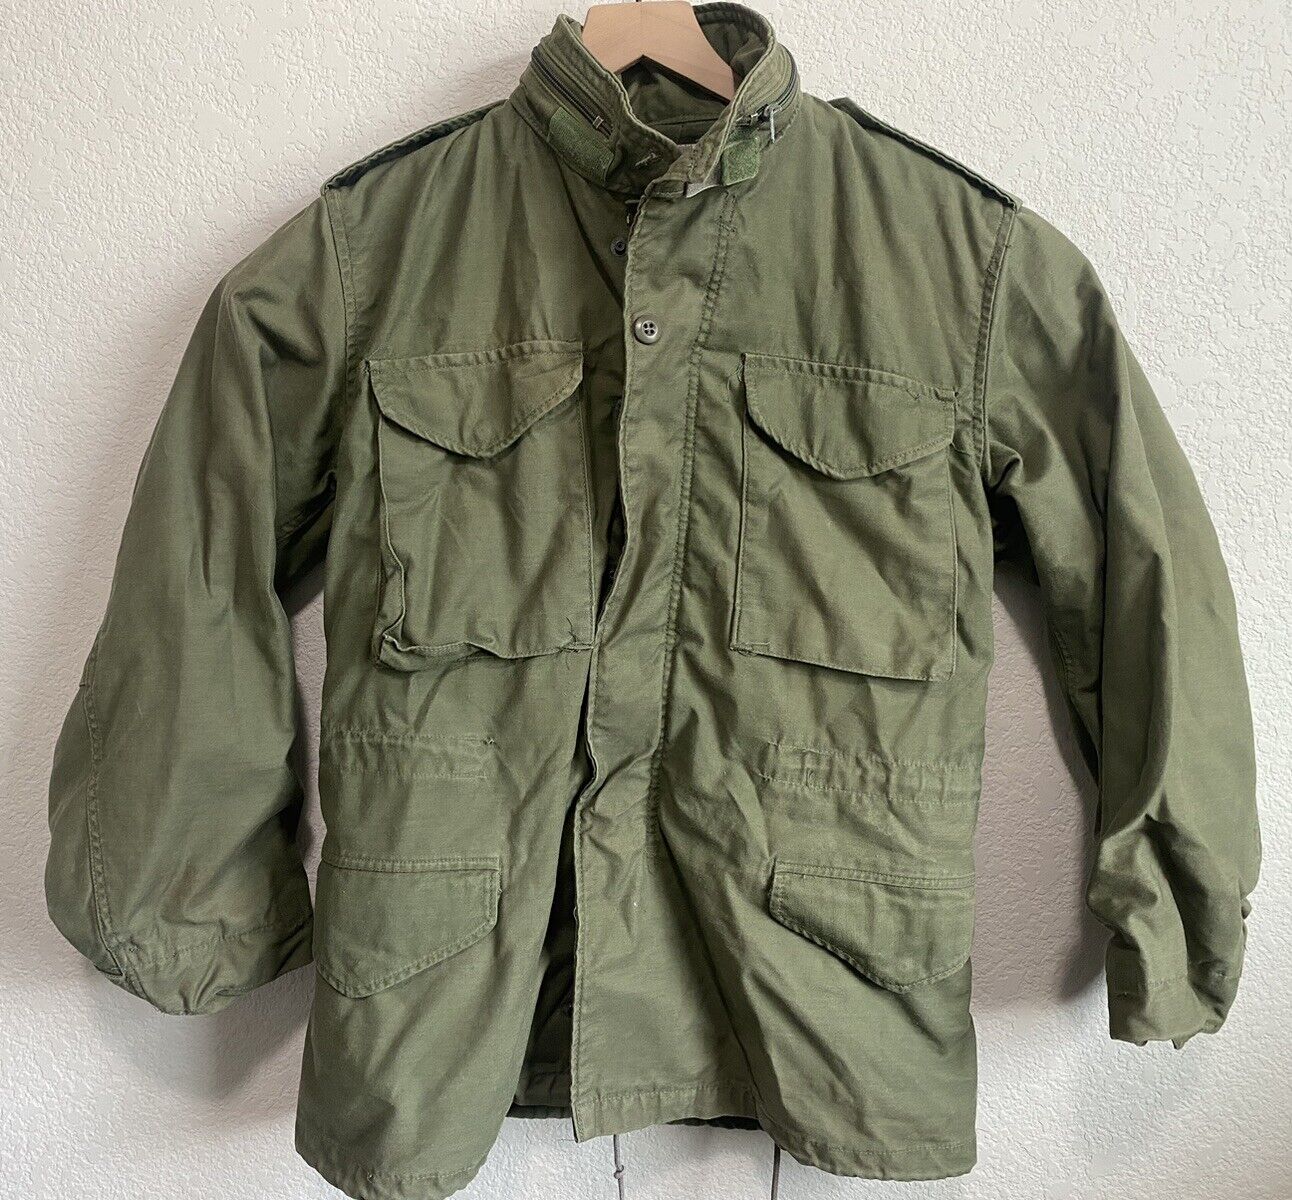 Vintage M-65 Field Jacket Small Od  Green OG-107  80s Rambo Style Military Issue